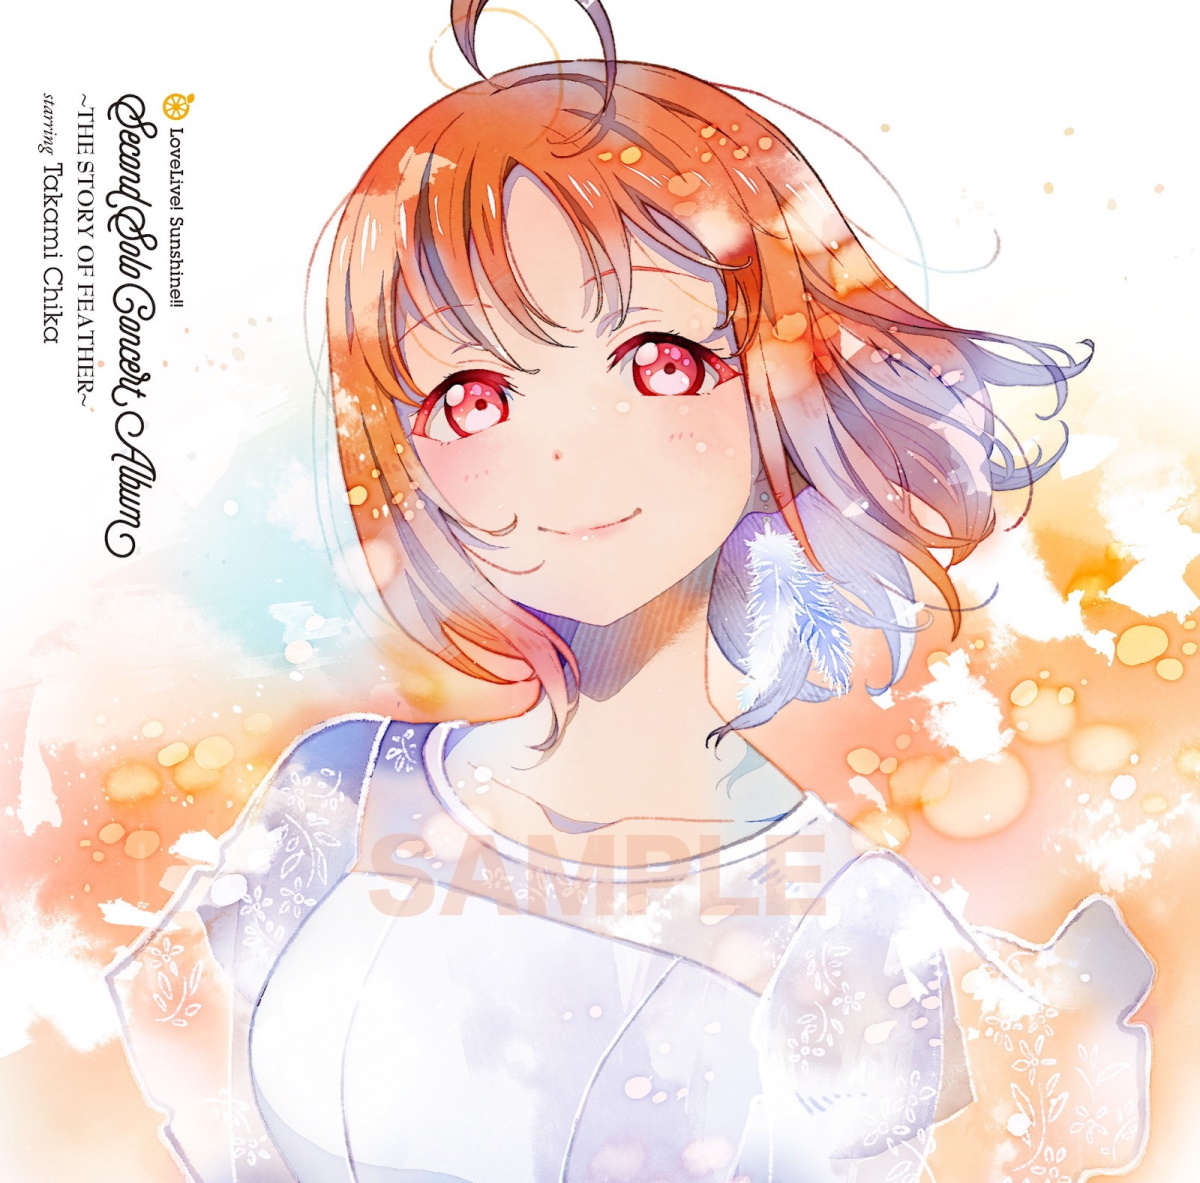 Cover art for『Chika Takami (Anju Inami) from Aqours - OKAWARI Happy life!』from the release『LoveLive! Sunshine!! Second Solo Concert Album ～THE STORY OF FEATHER～ starring Takami Chika